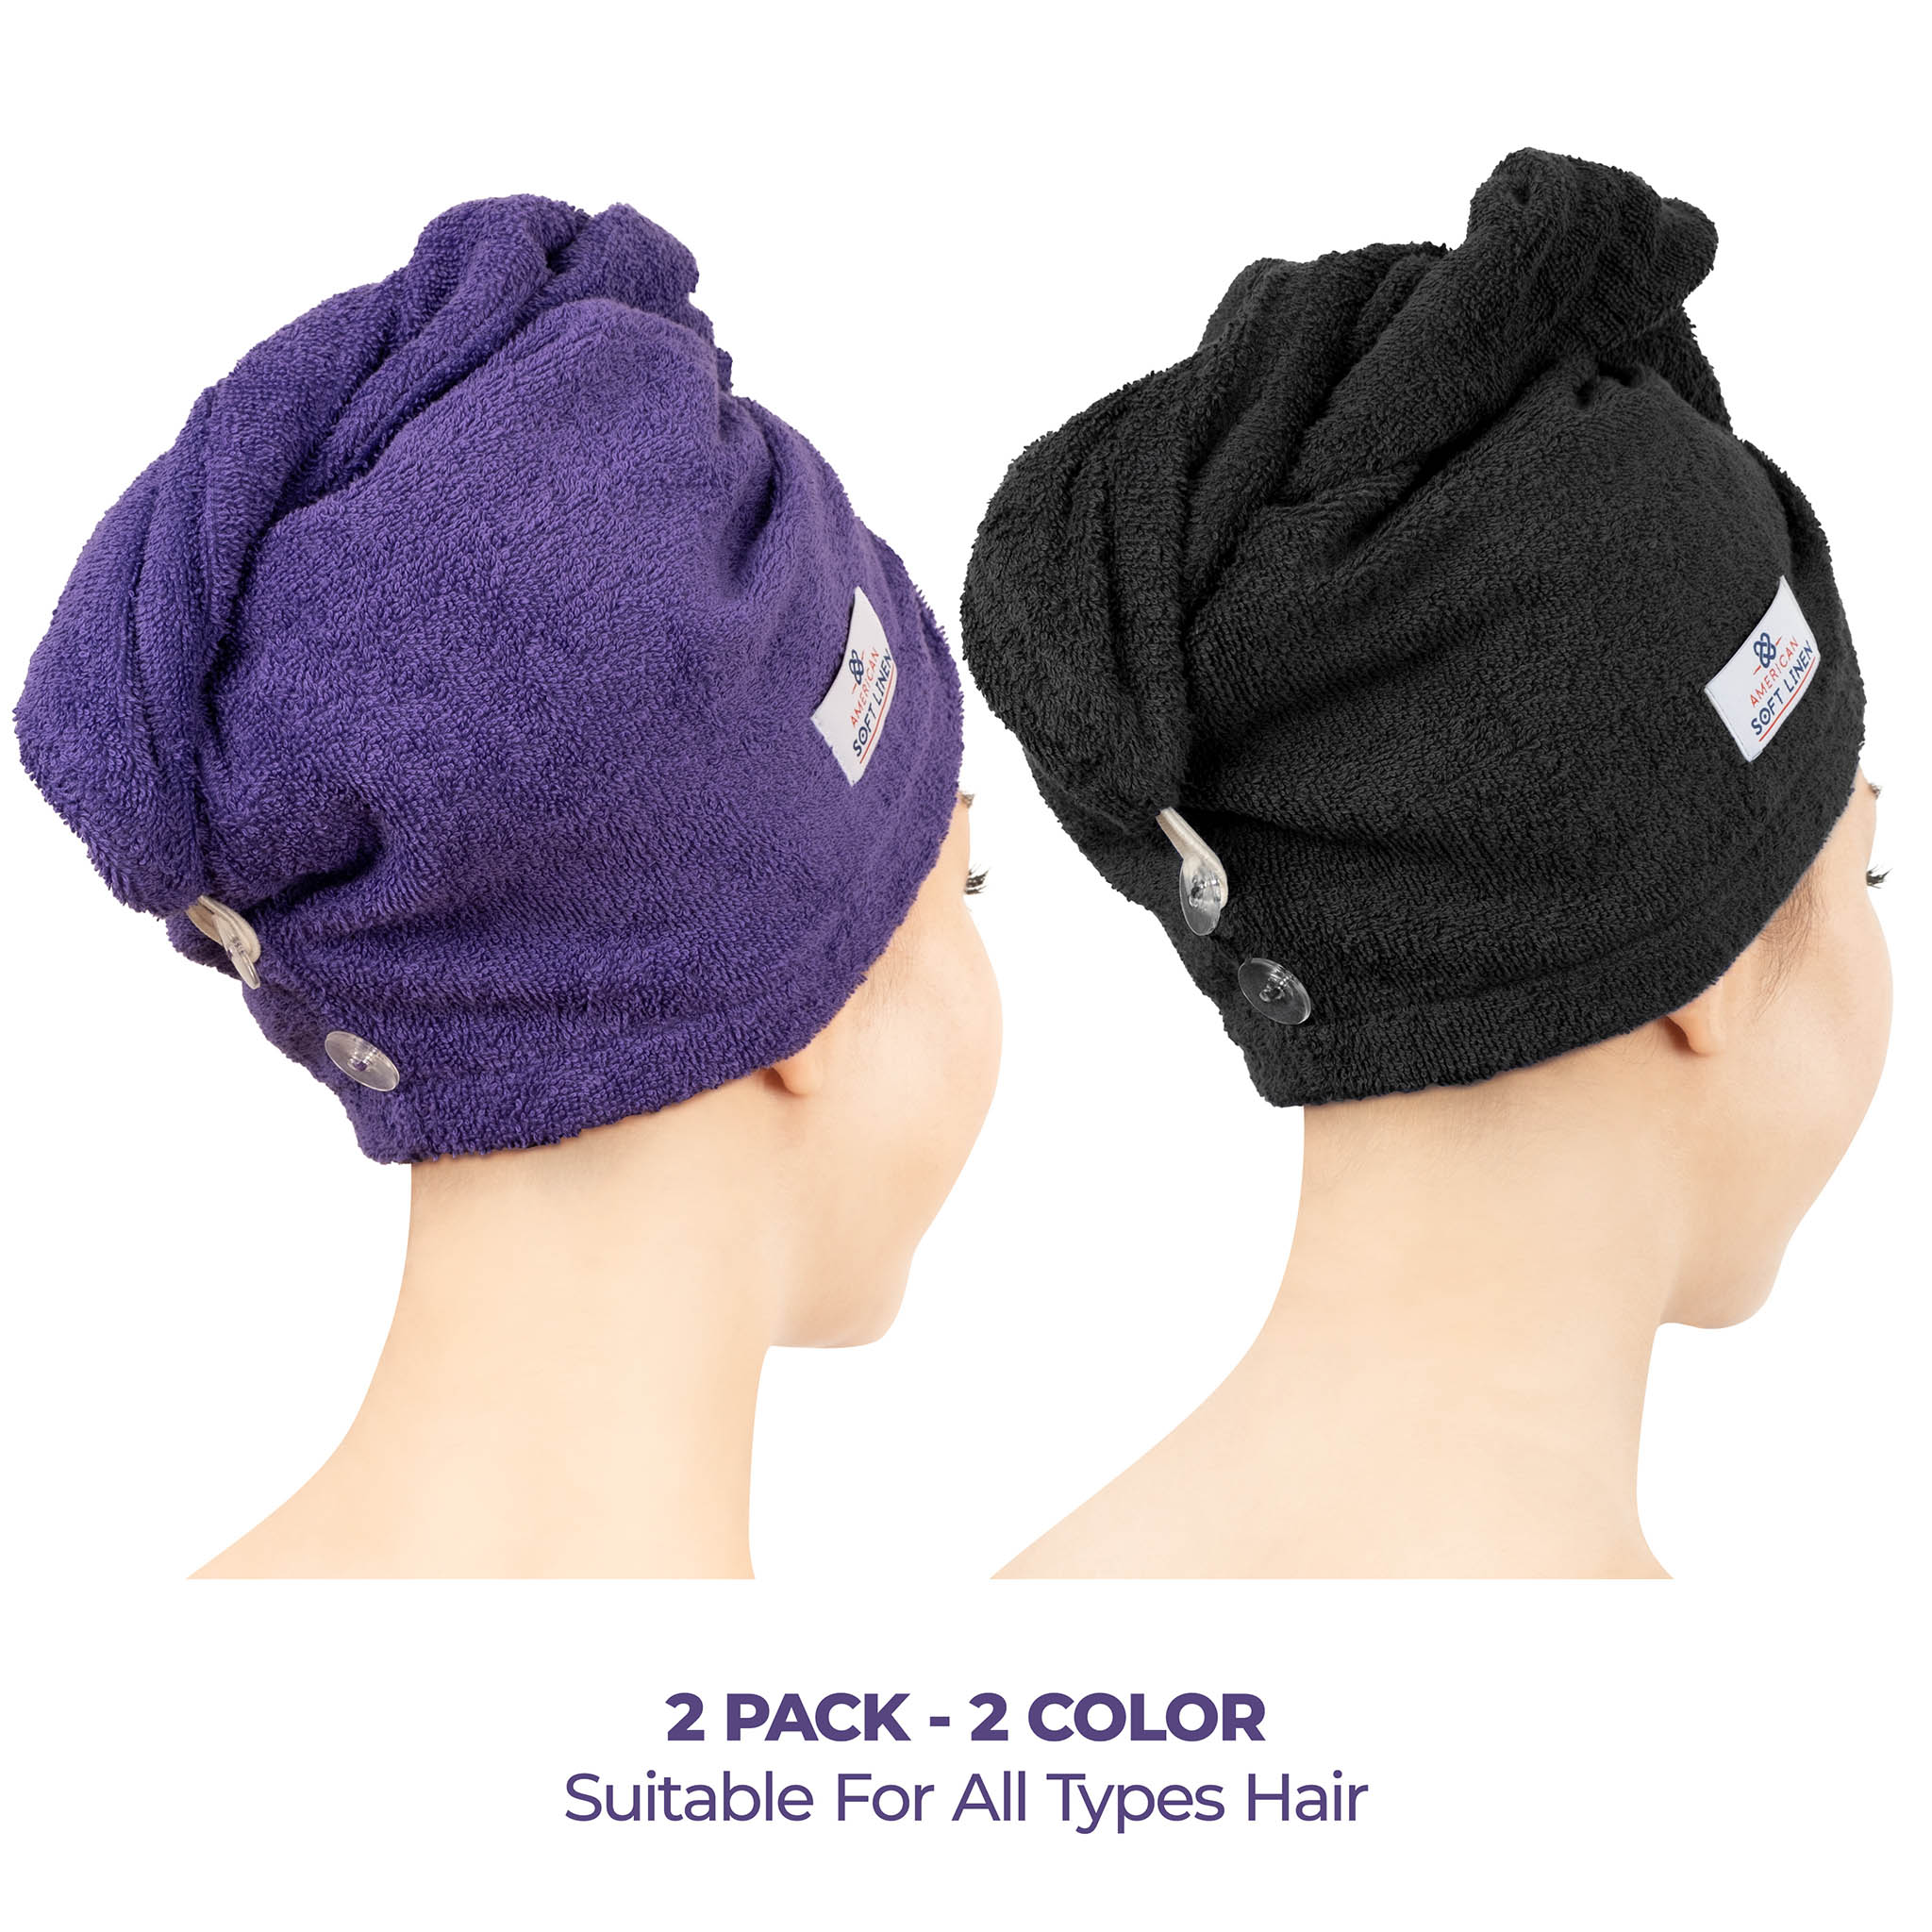 American Soft Linen 100% Cotton Hair Drying Towels for Women 2 pack 75 set case pack purple-black-2